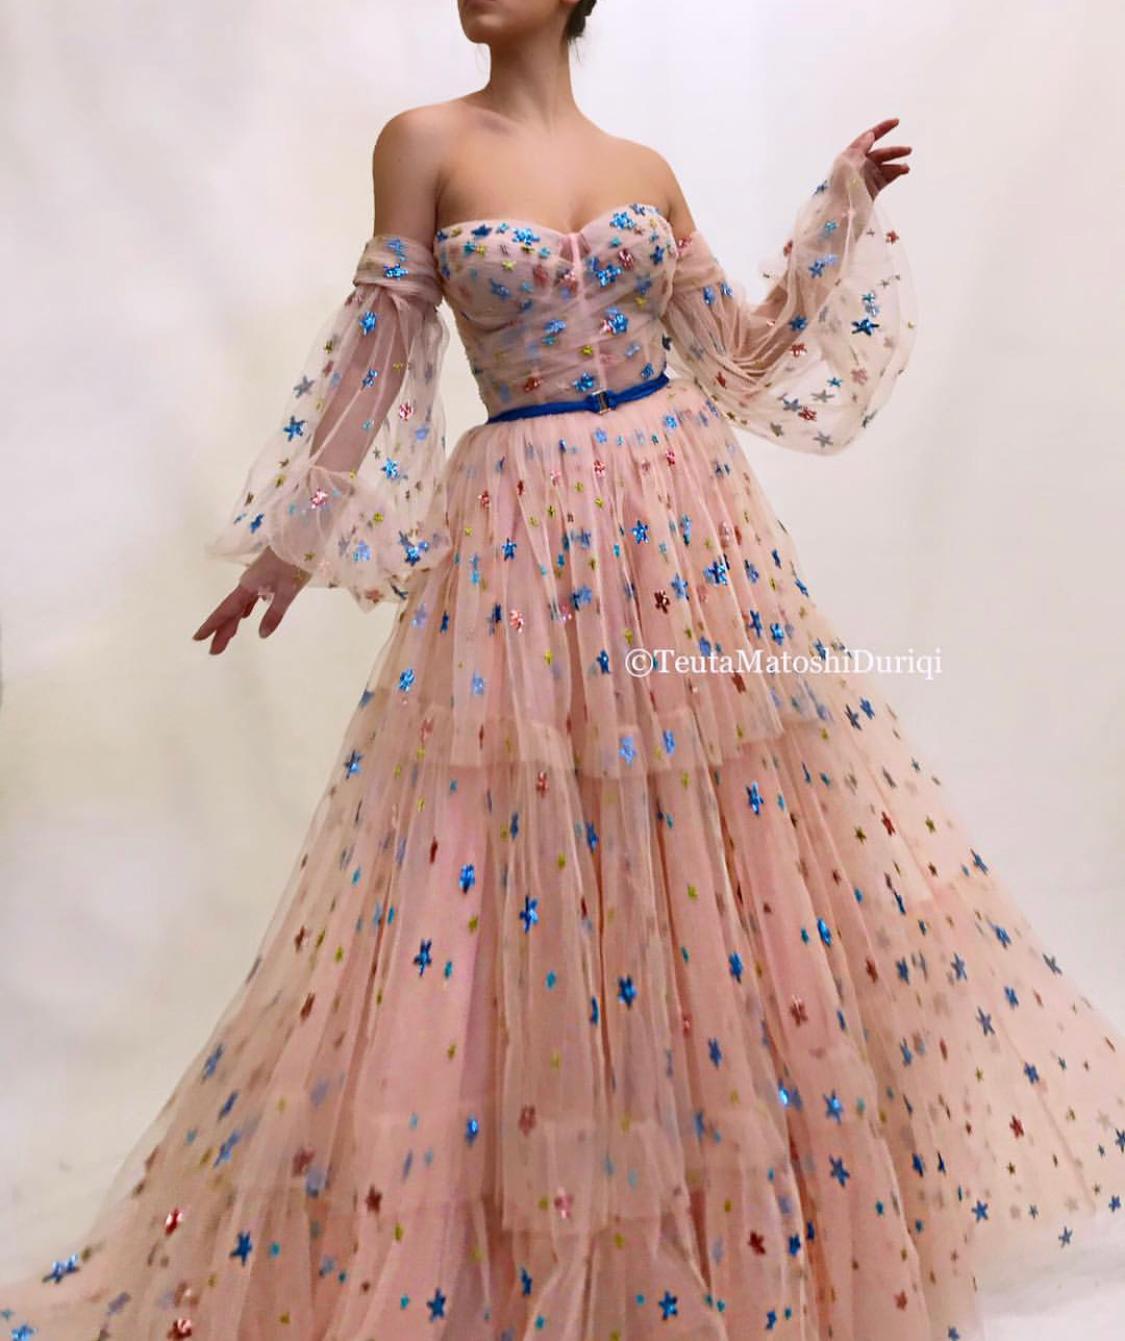 Pink A-Line dress with belt, long off the shoulder sleeves and starry fabric